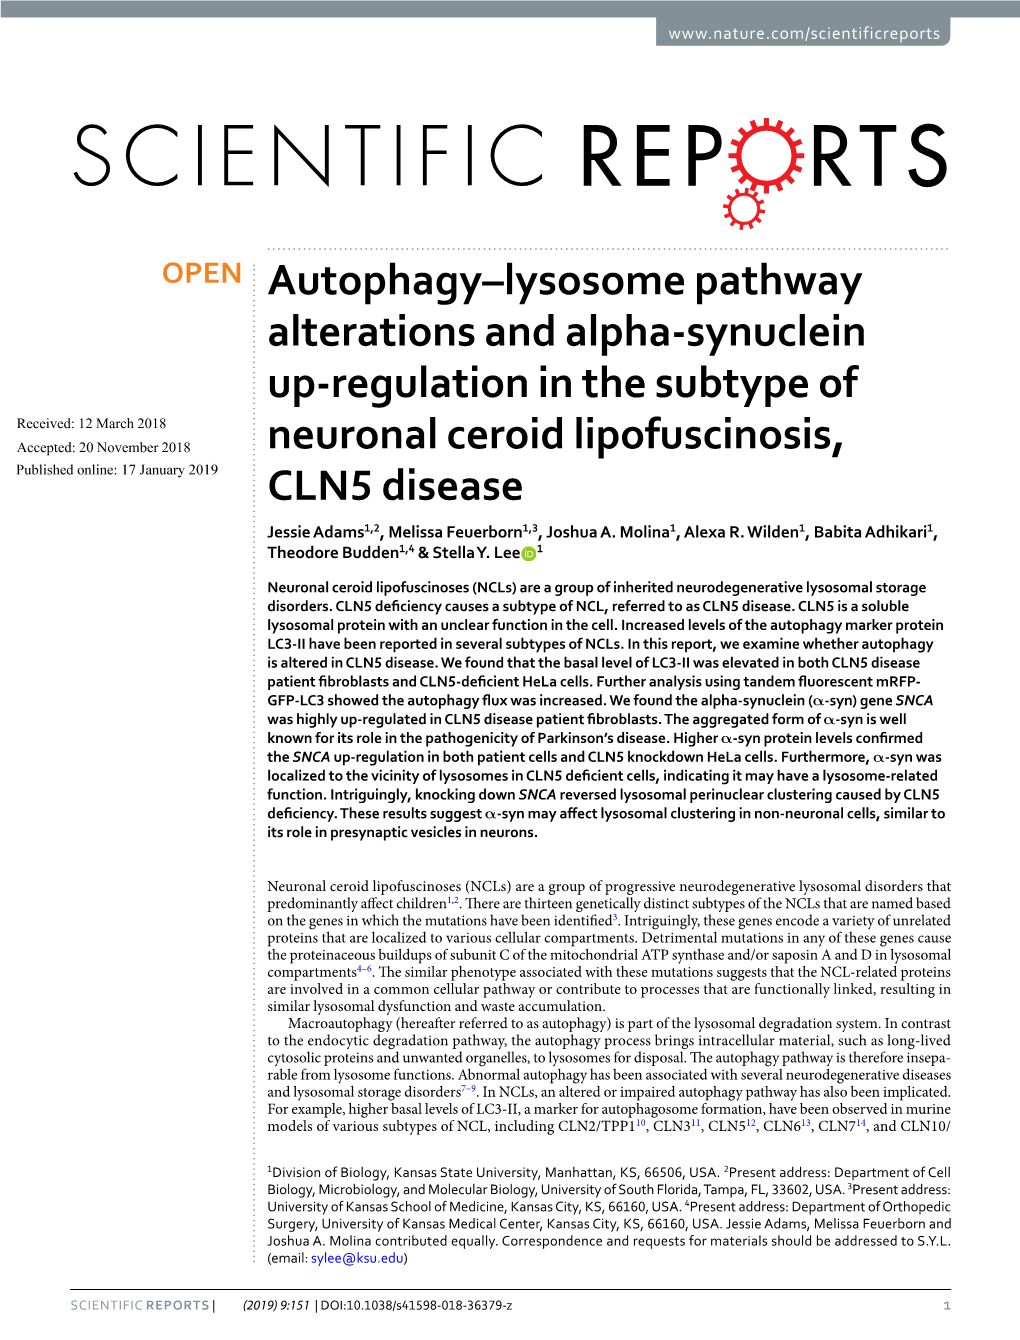 Autophagy–Lysosome Pathway Alterations and Alpha-Synuclein Up